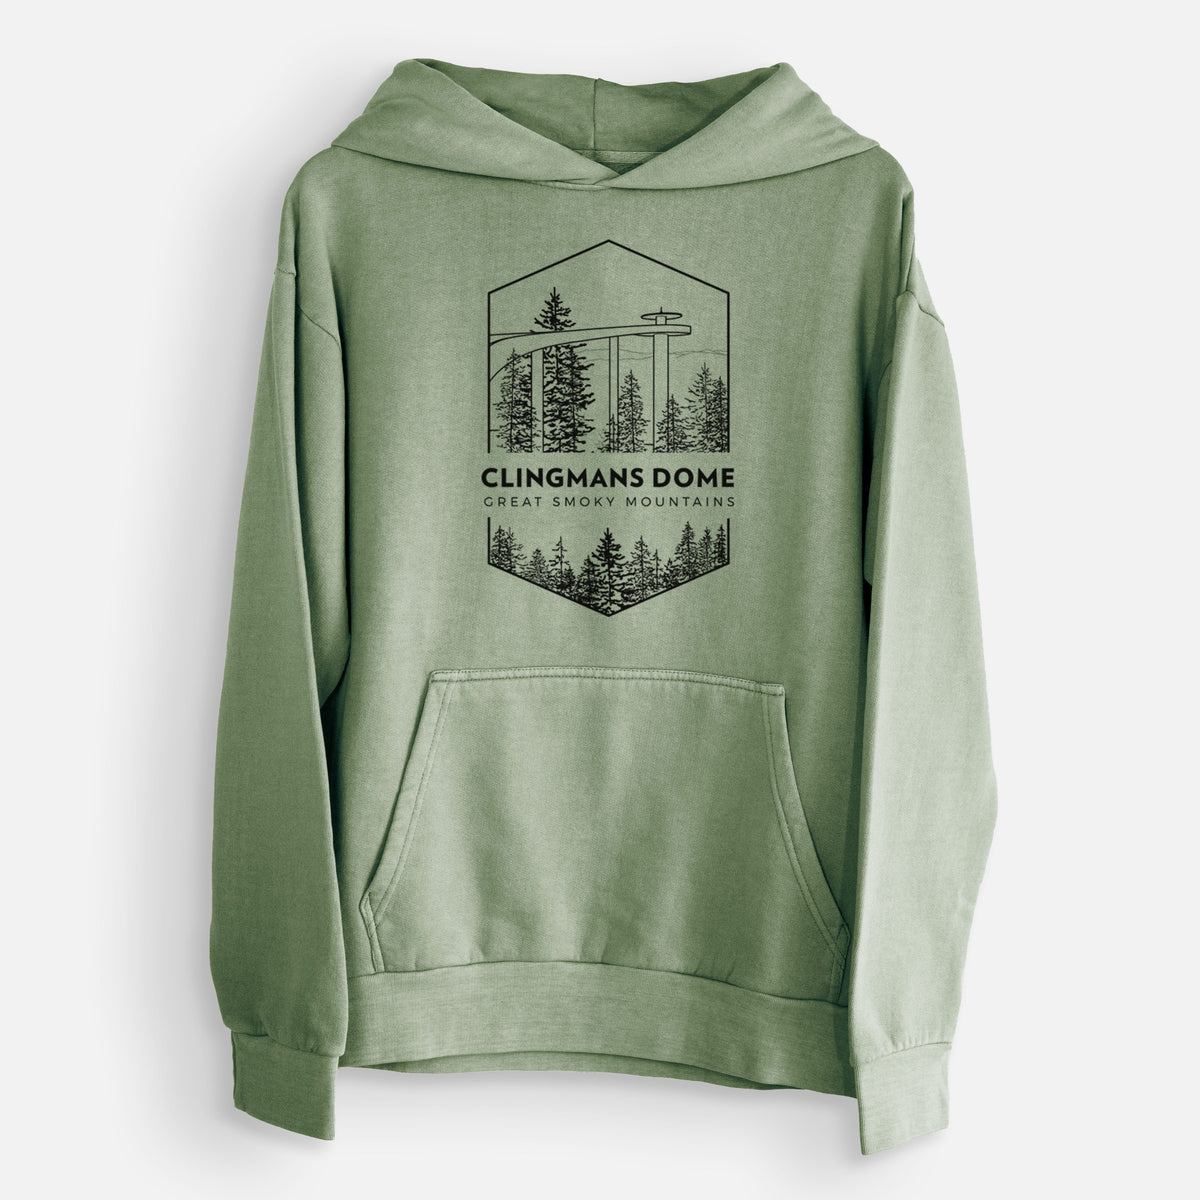 Clingmans Dome - Great Smoky Mountains National Park  - Urban Heavyweight Hoodie